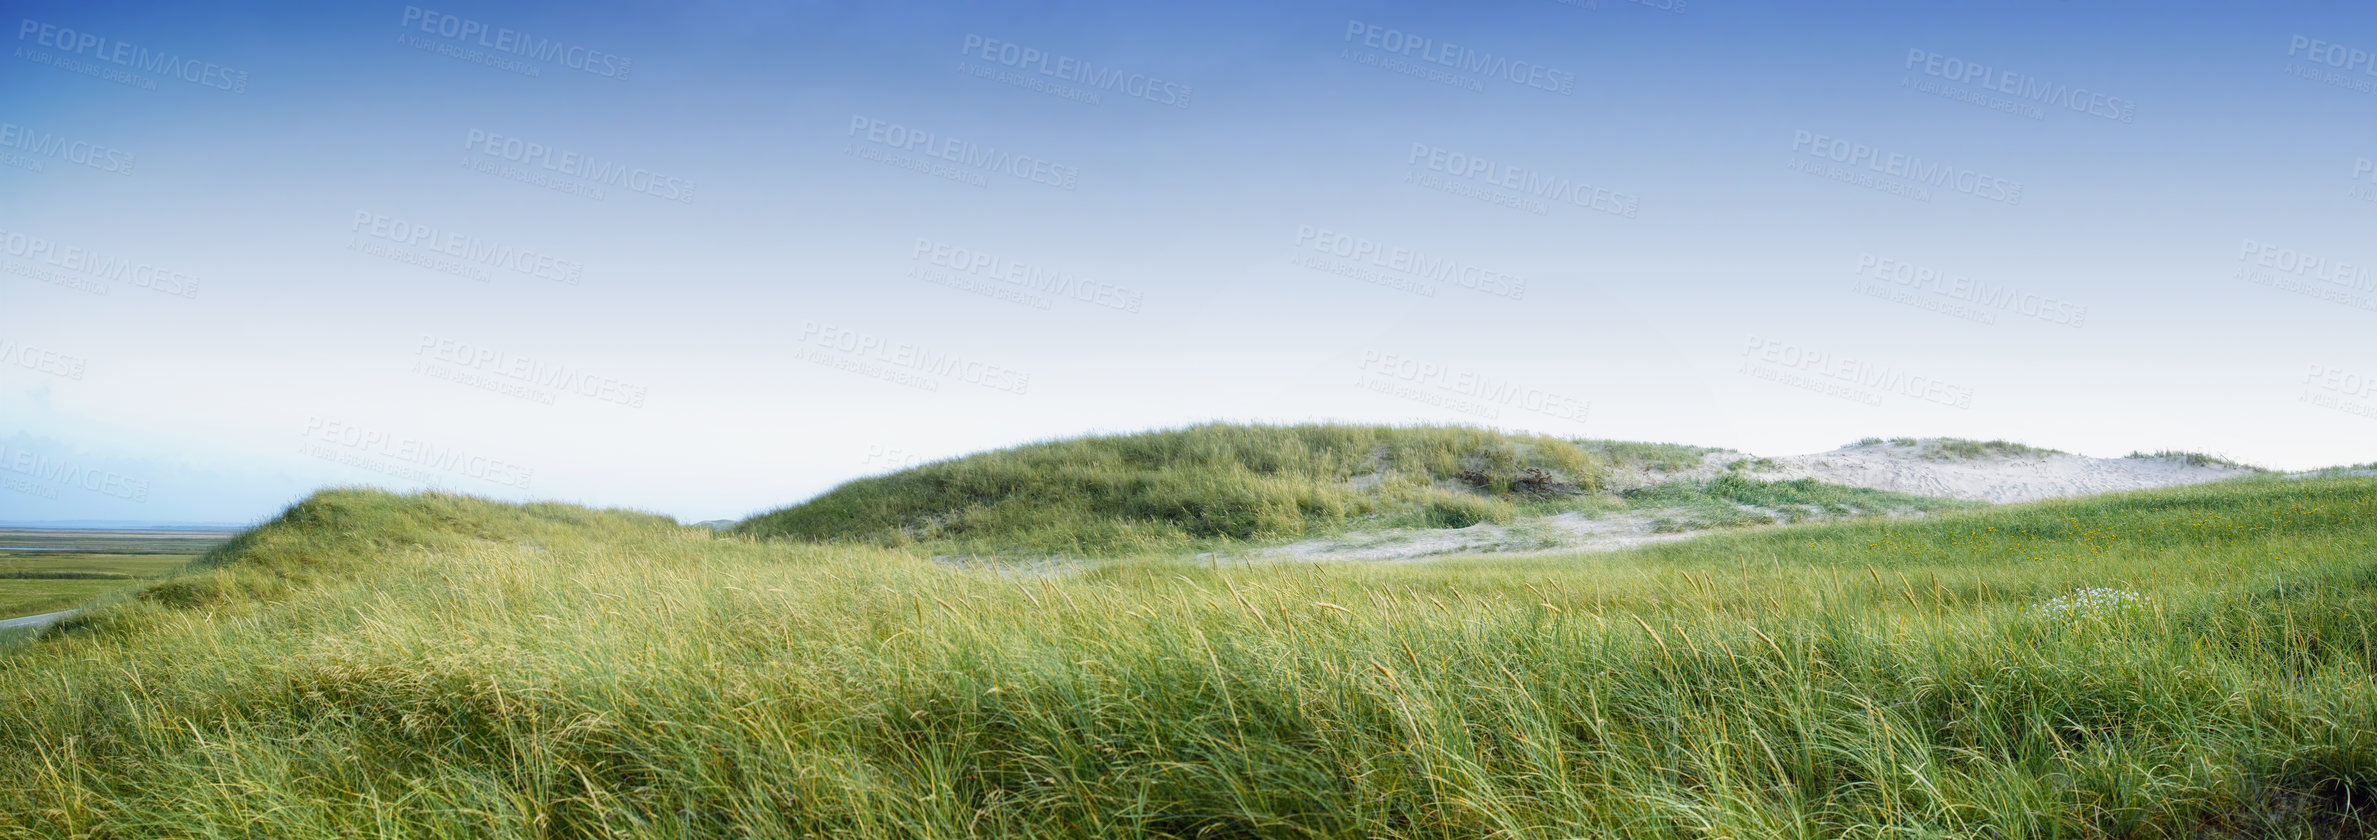 Buy stock photo Copyspace with green grass growing on an empty beach or dune against a blue sky background. Scenic seaside to explore for travel and tourism. Sandy landscape on coast of Jutland in Loekken Denmark